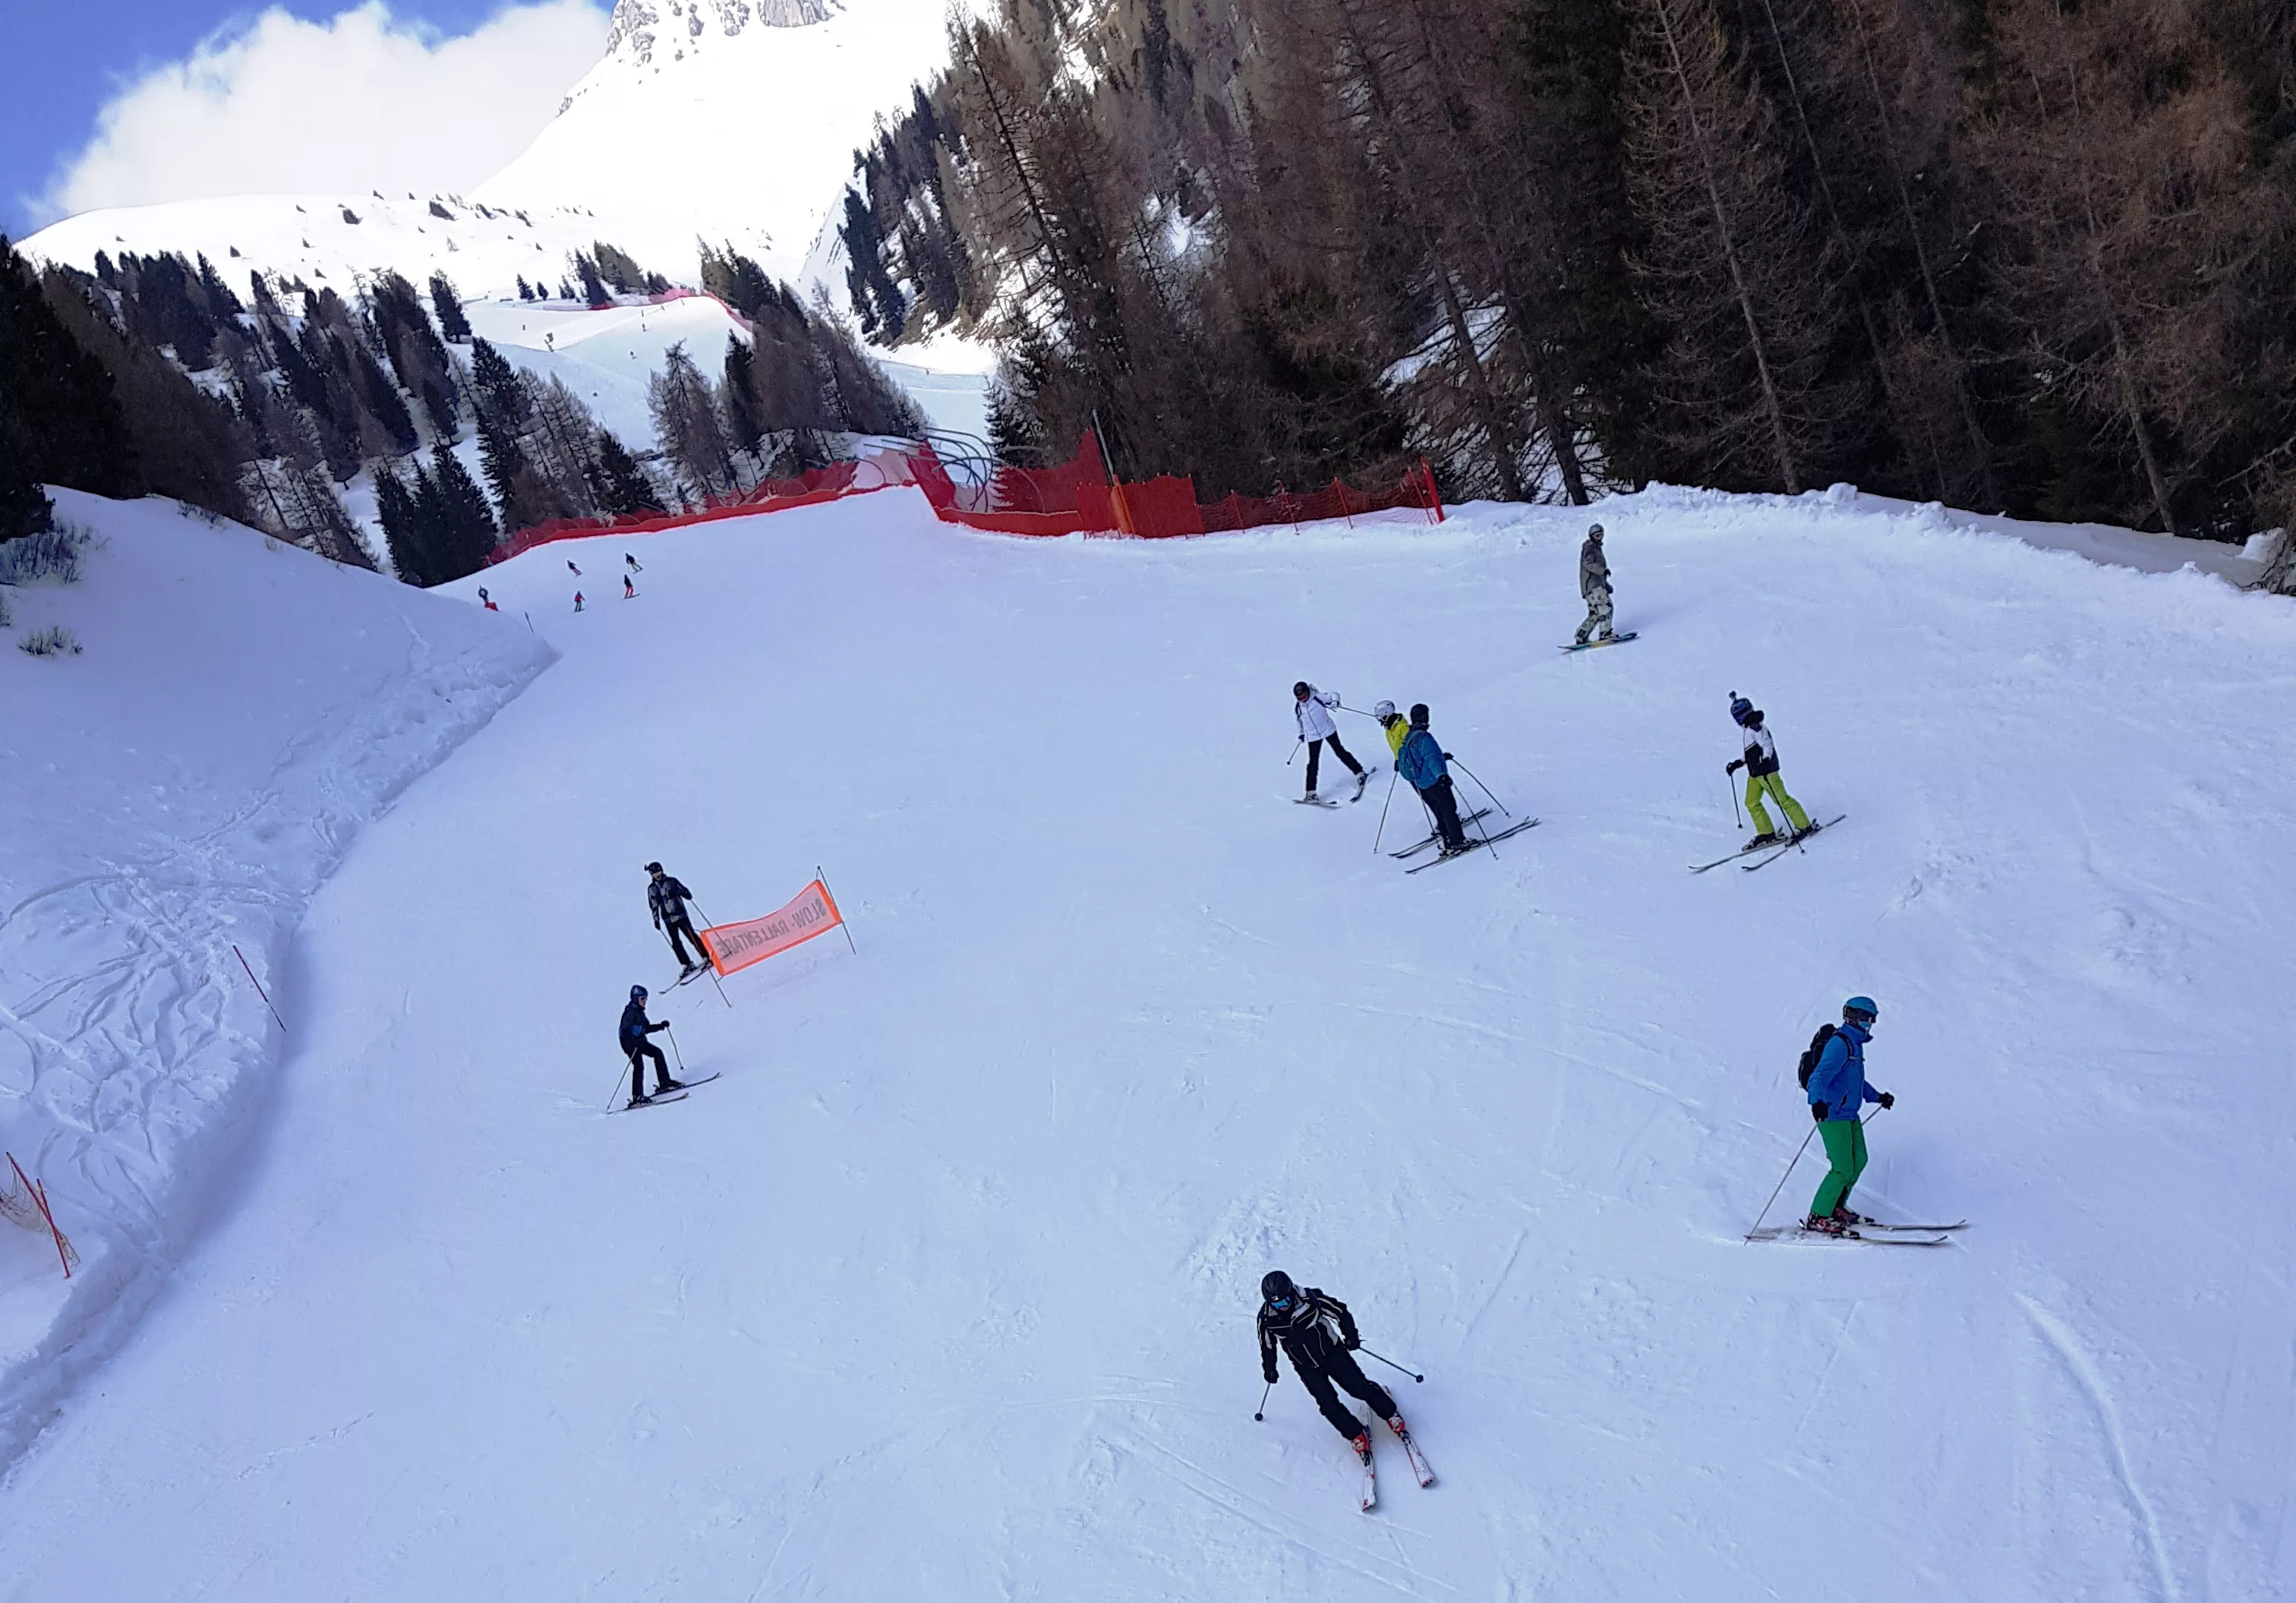 Ski Center Latemar in Italy, Europe | Snowboarding,Skiing - Rated 4.5